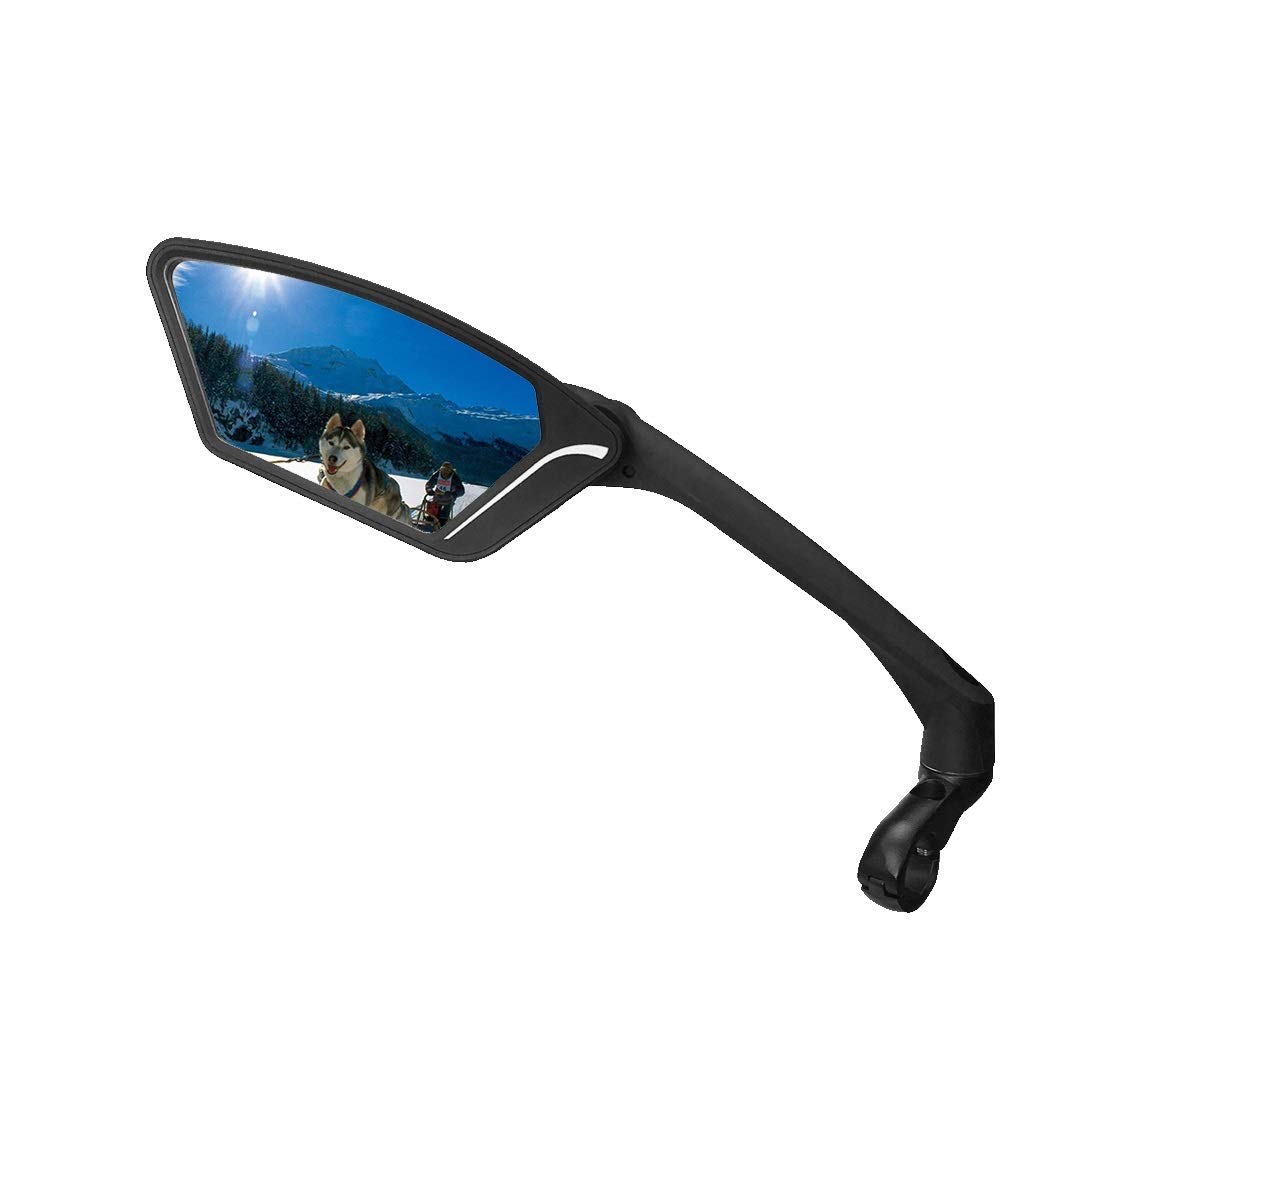 MEACHOW New Scratch Resistant Glass Lens,Handlebar Bike Mirror, Rotatable Safe Rearview Mirror, Bicycle Mirror,(Blue Left Side) ME-010LB von MEACHOW